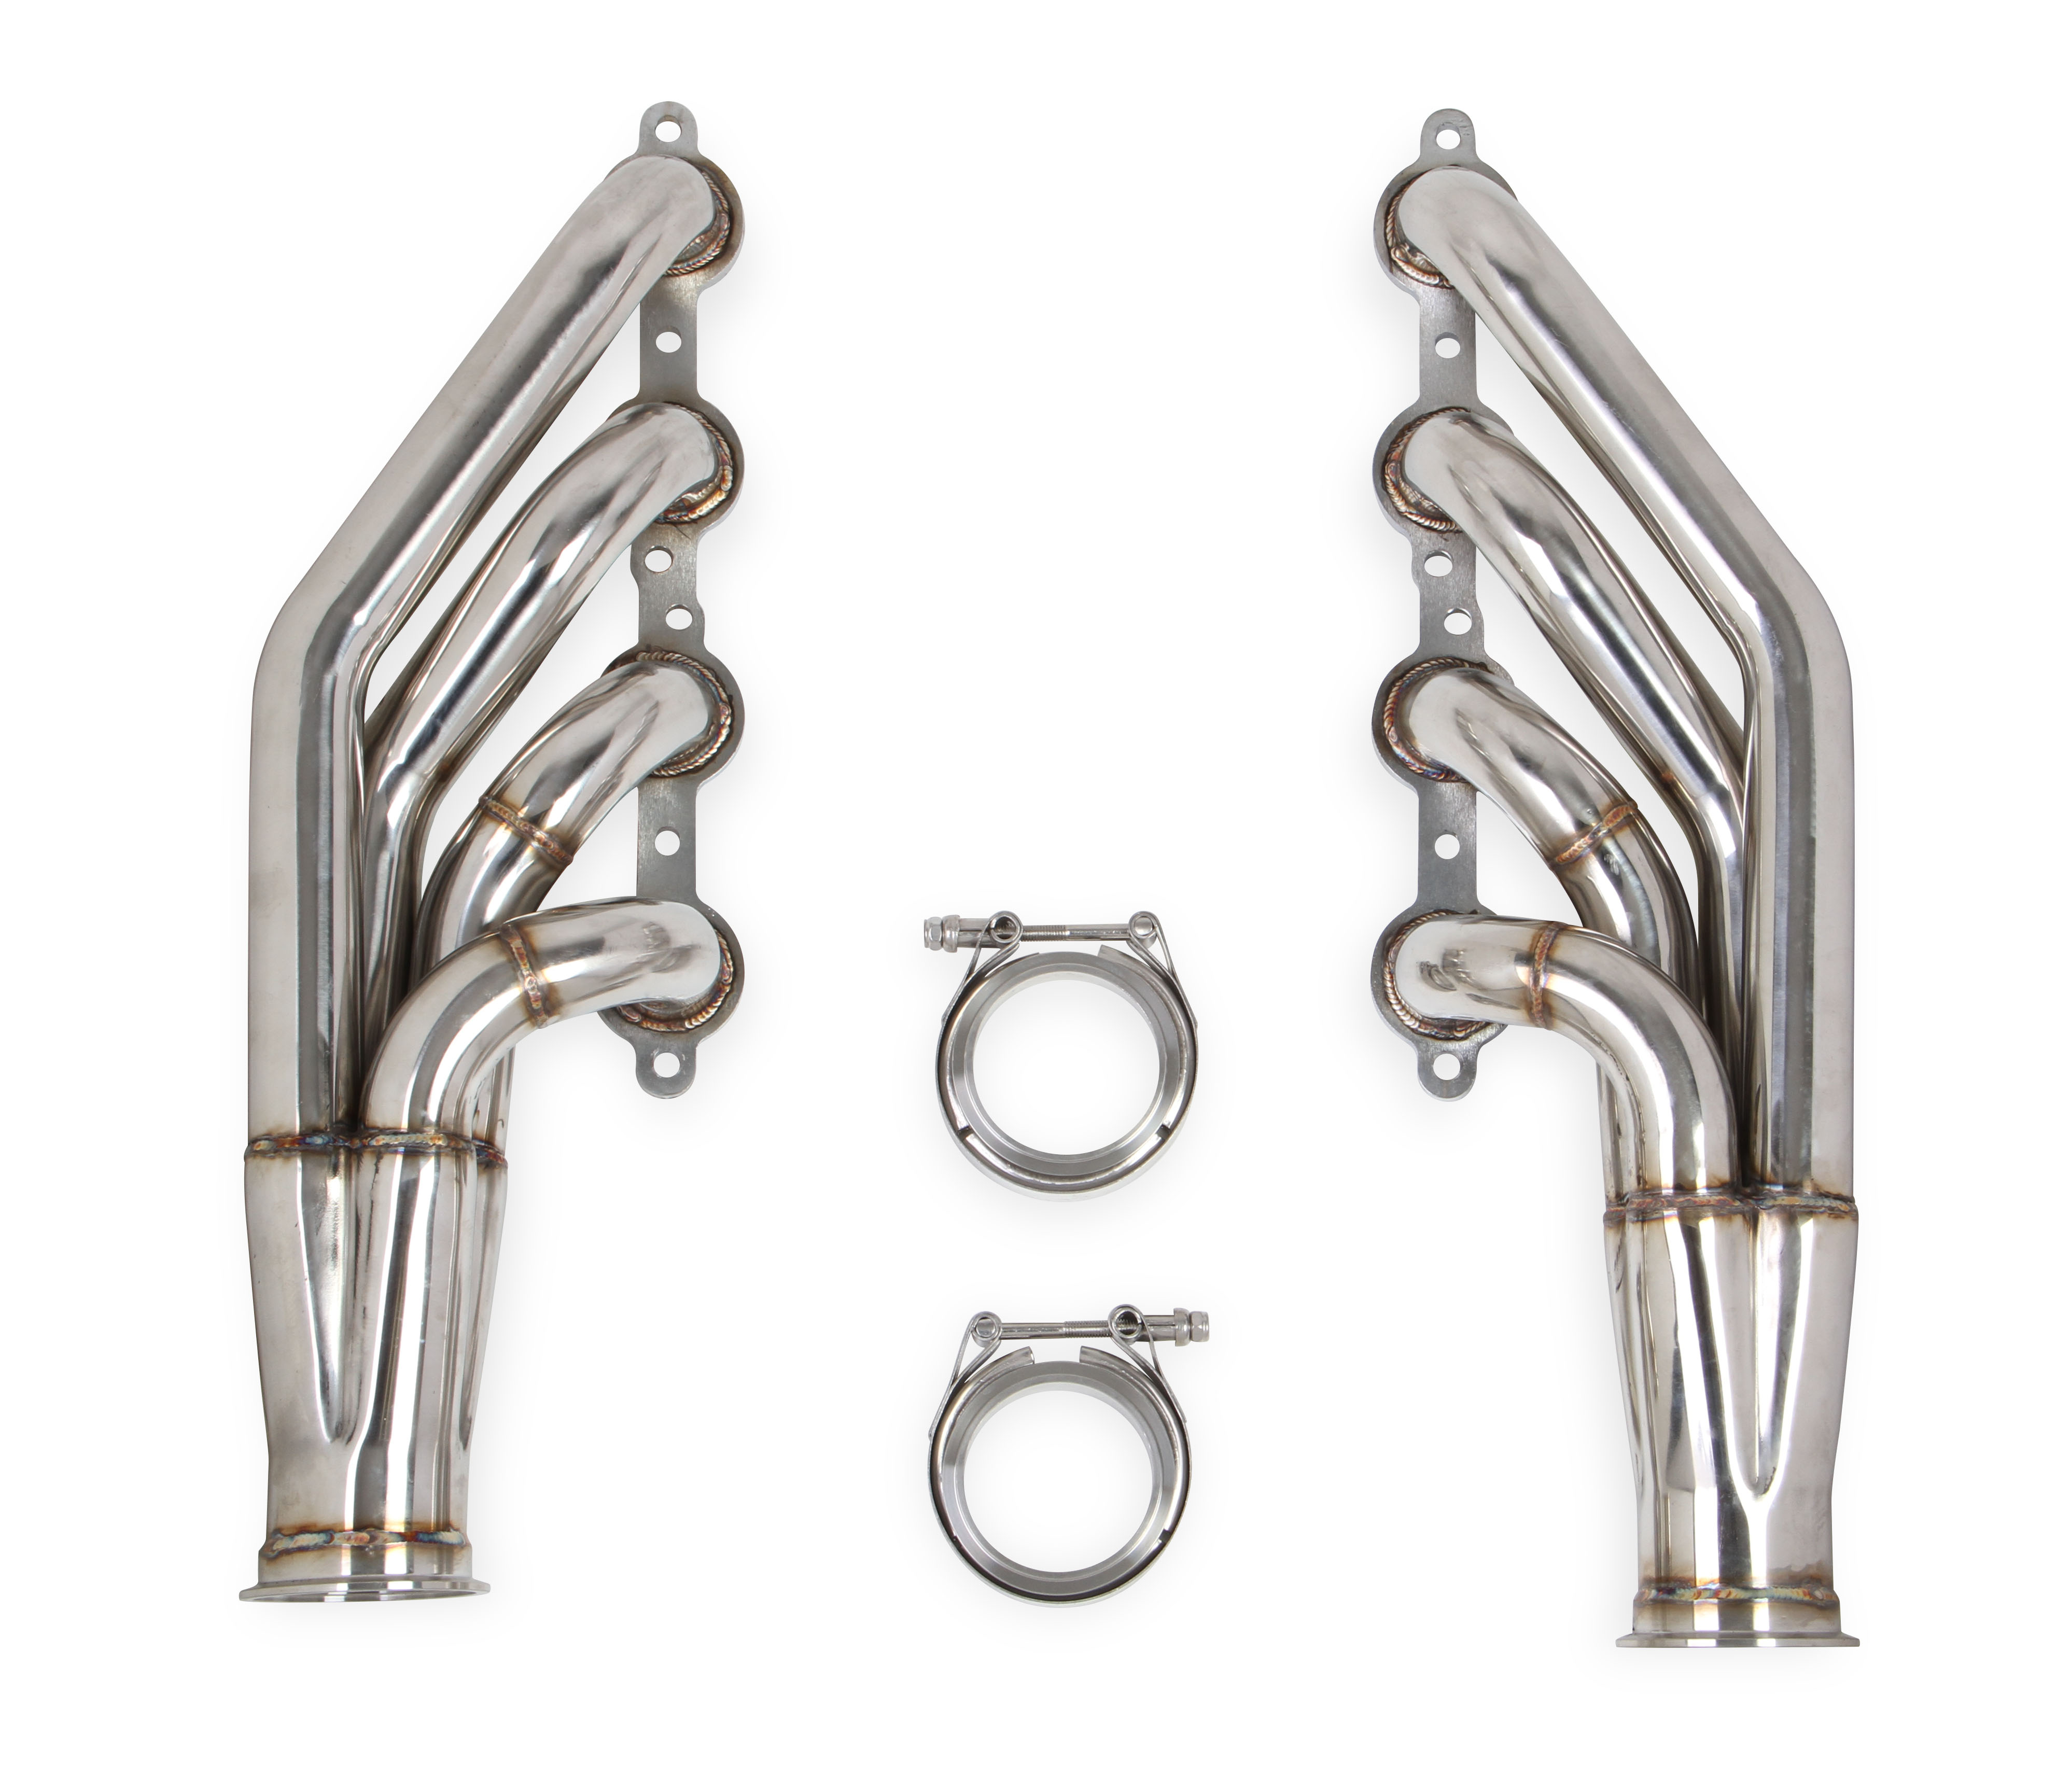 Flowtech LS 4.8L/5.3L/6.0L V8 1 3/4" 409 Stainless Turbo Headers - Natural Finish